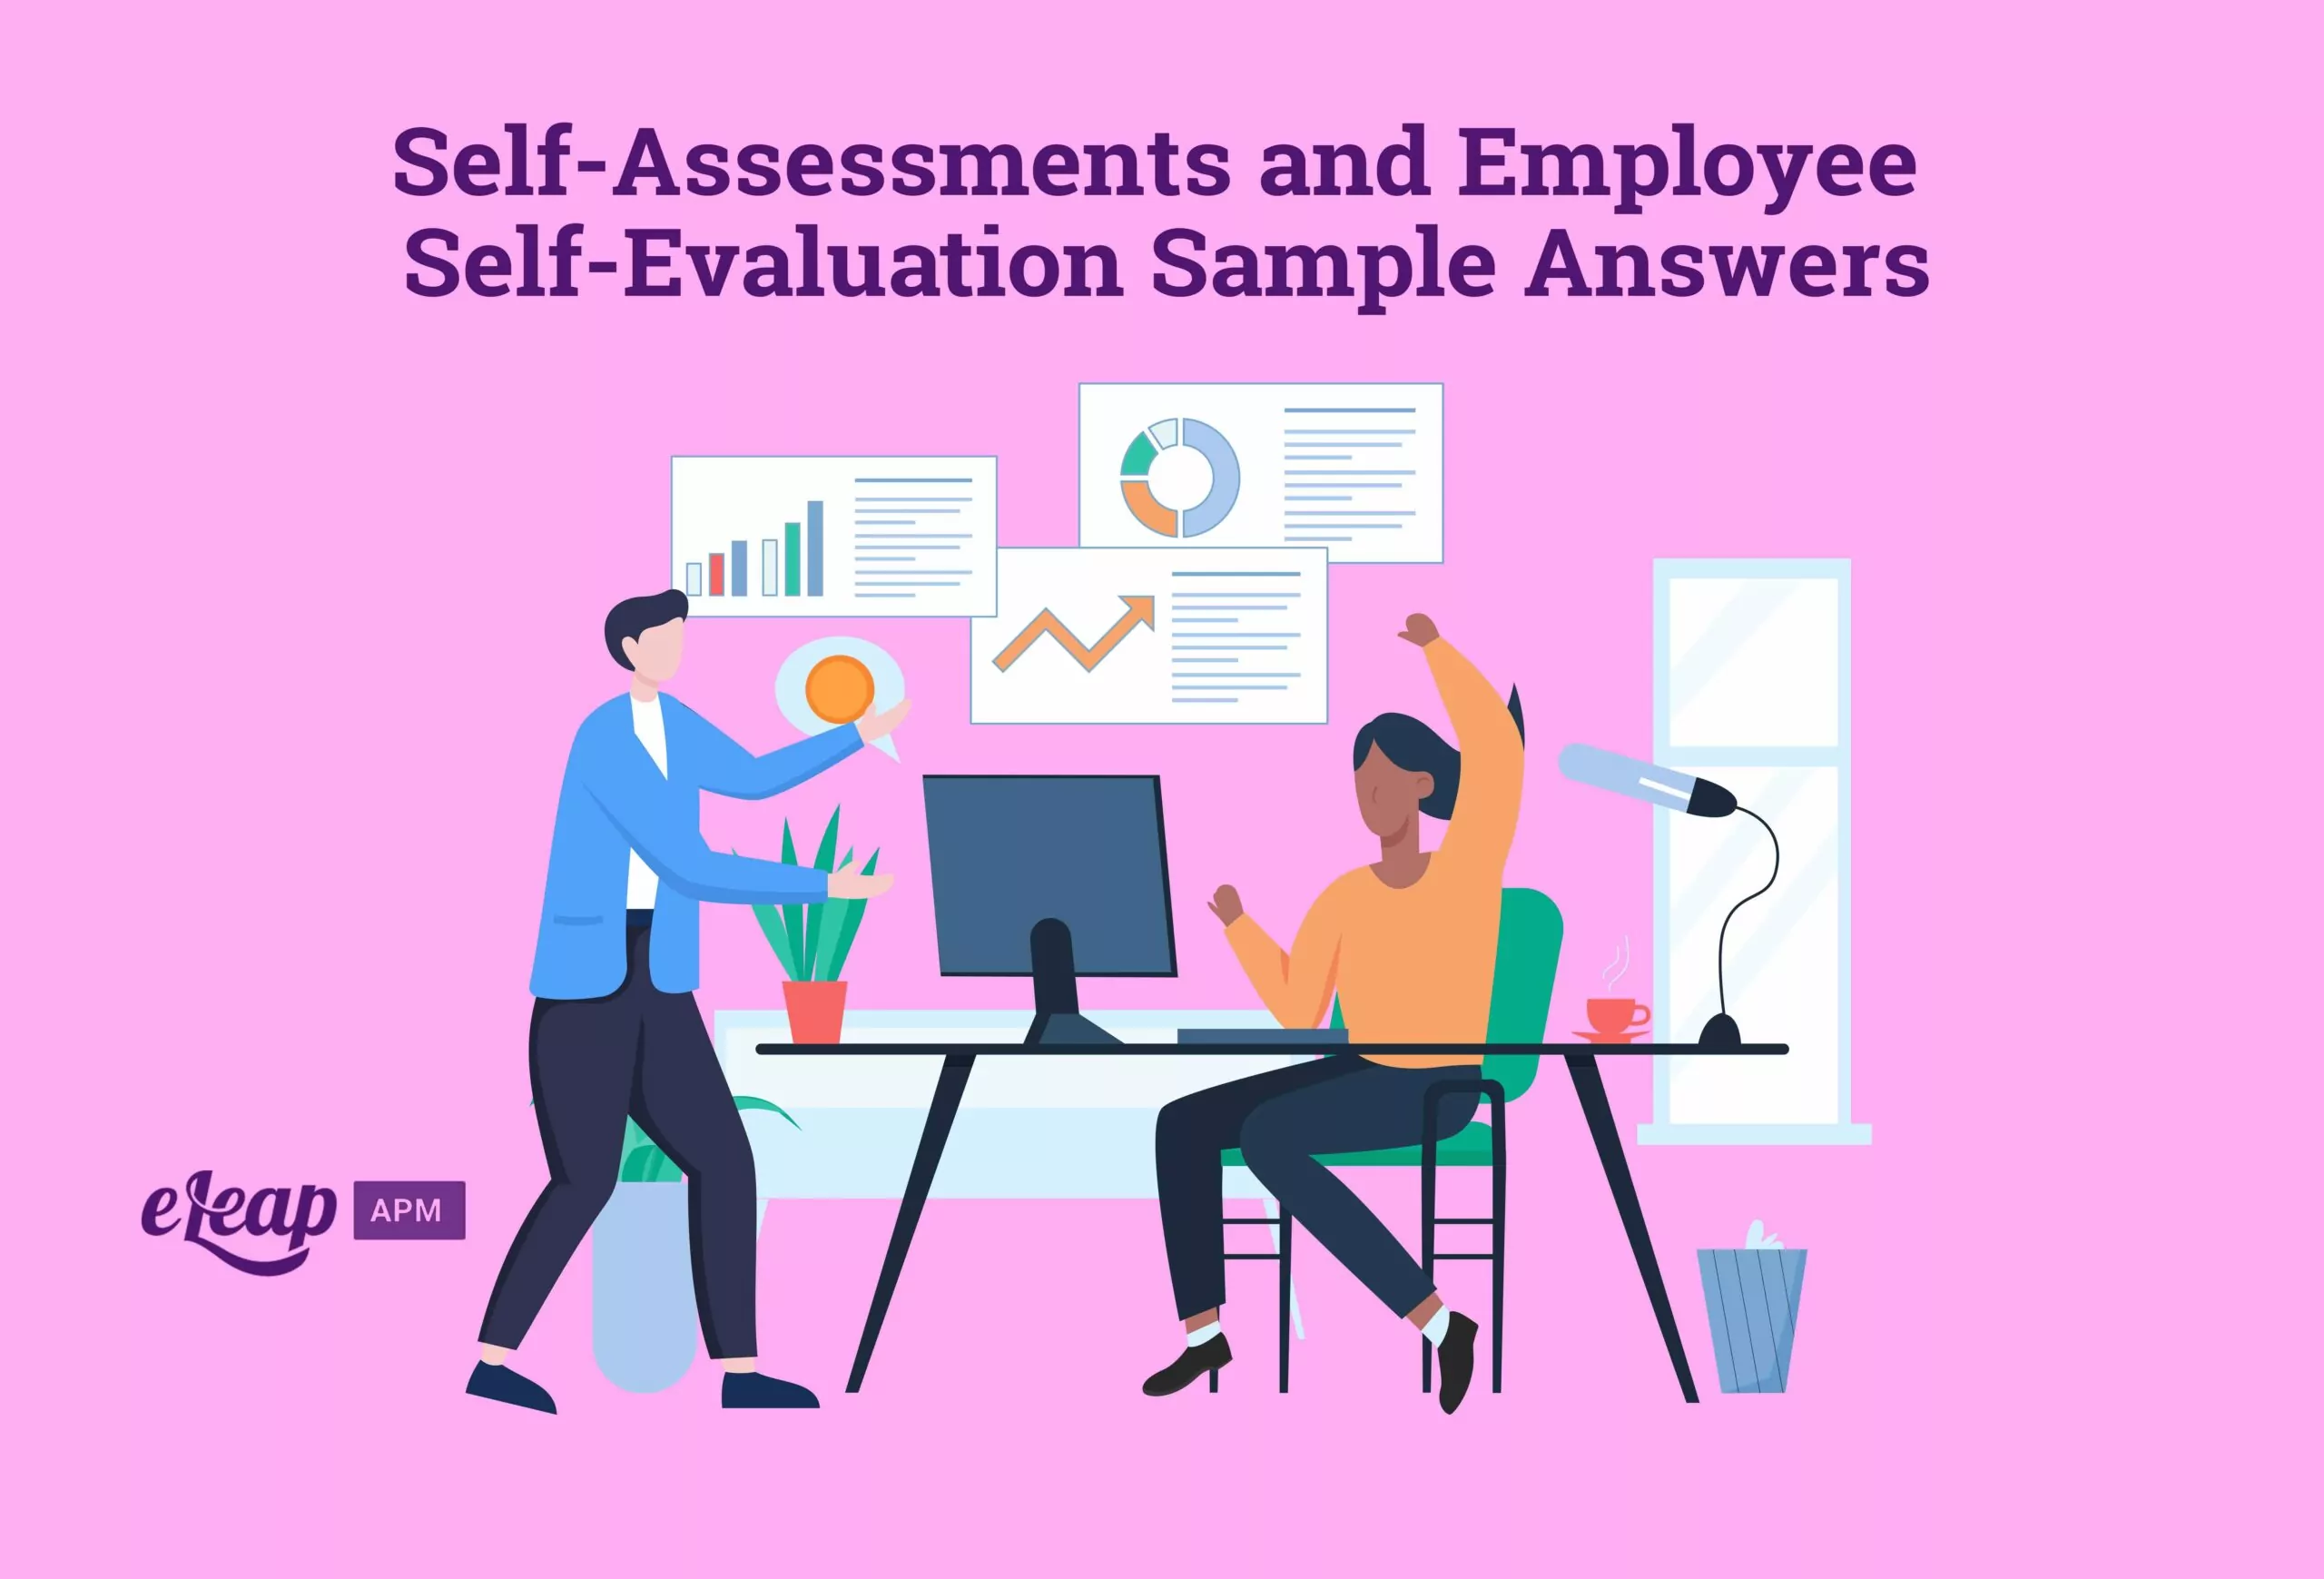 Self-Assessments and Employee Self-Evaluation Sample Answers